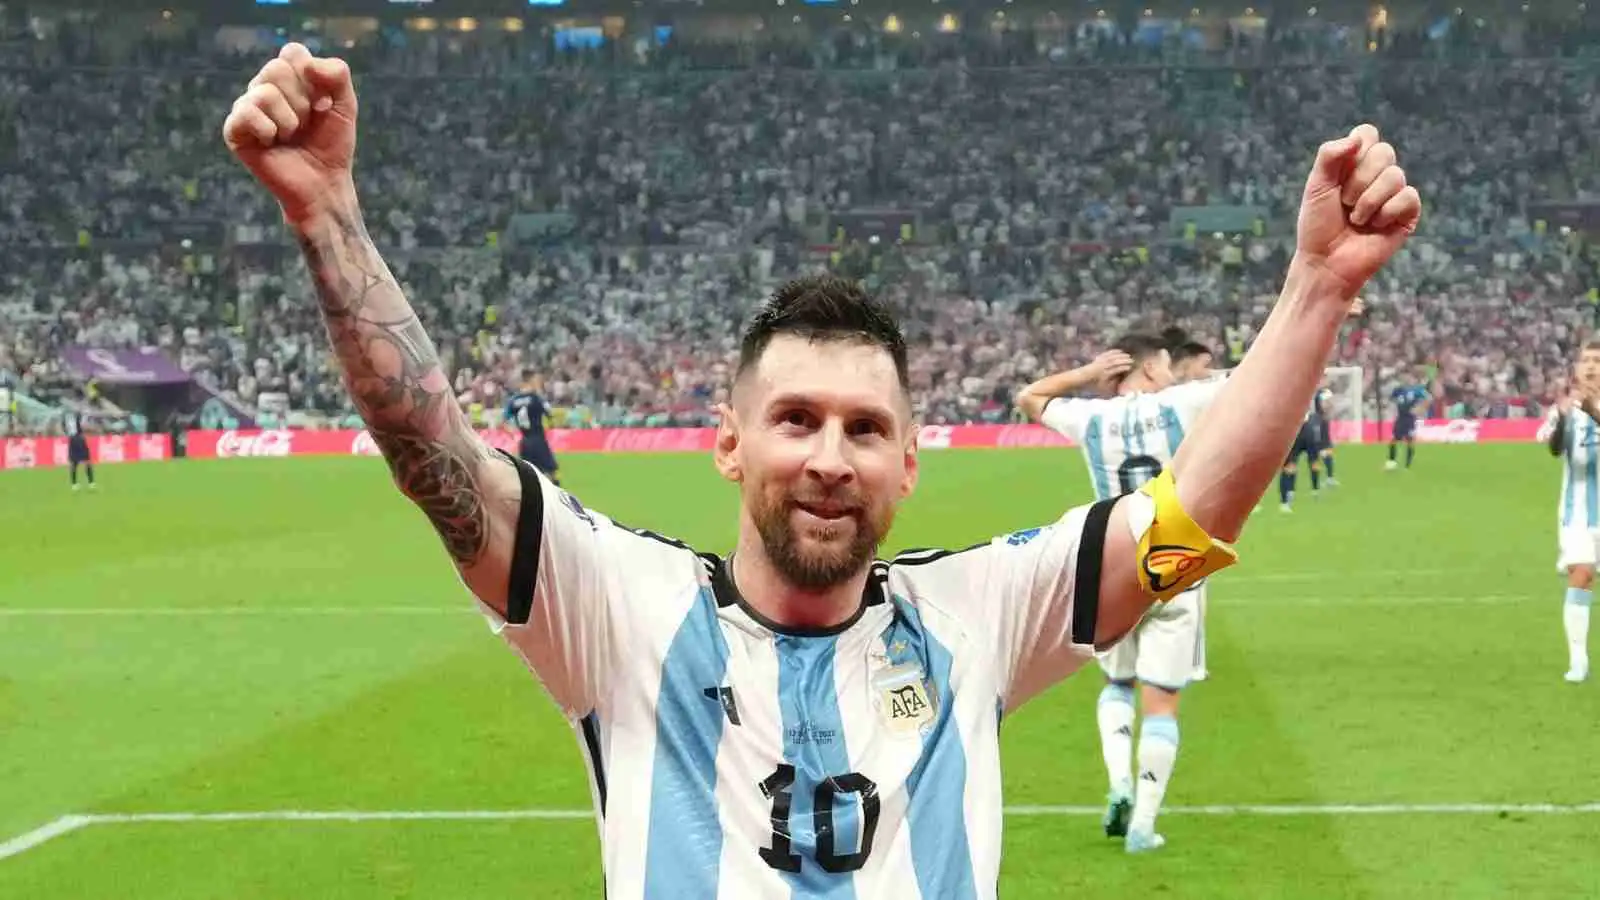 Lionel Messi celebrating for Argentina at World Cup